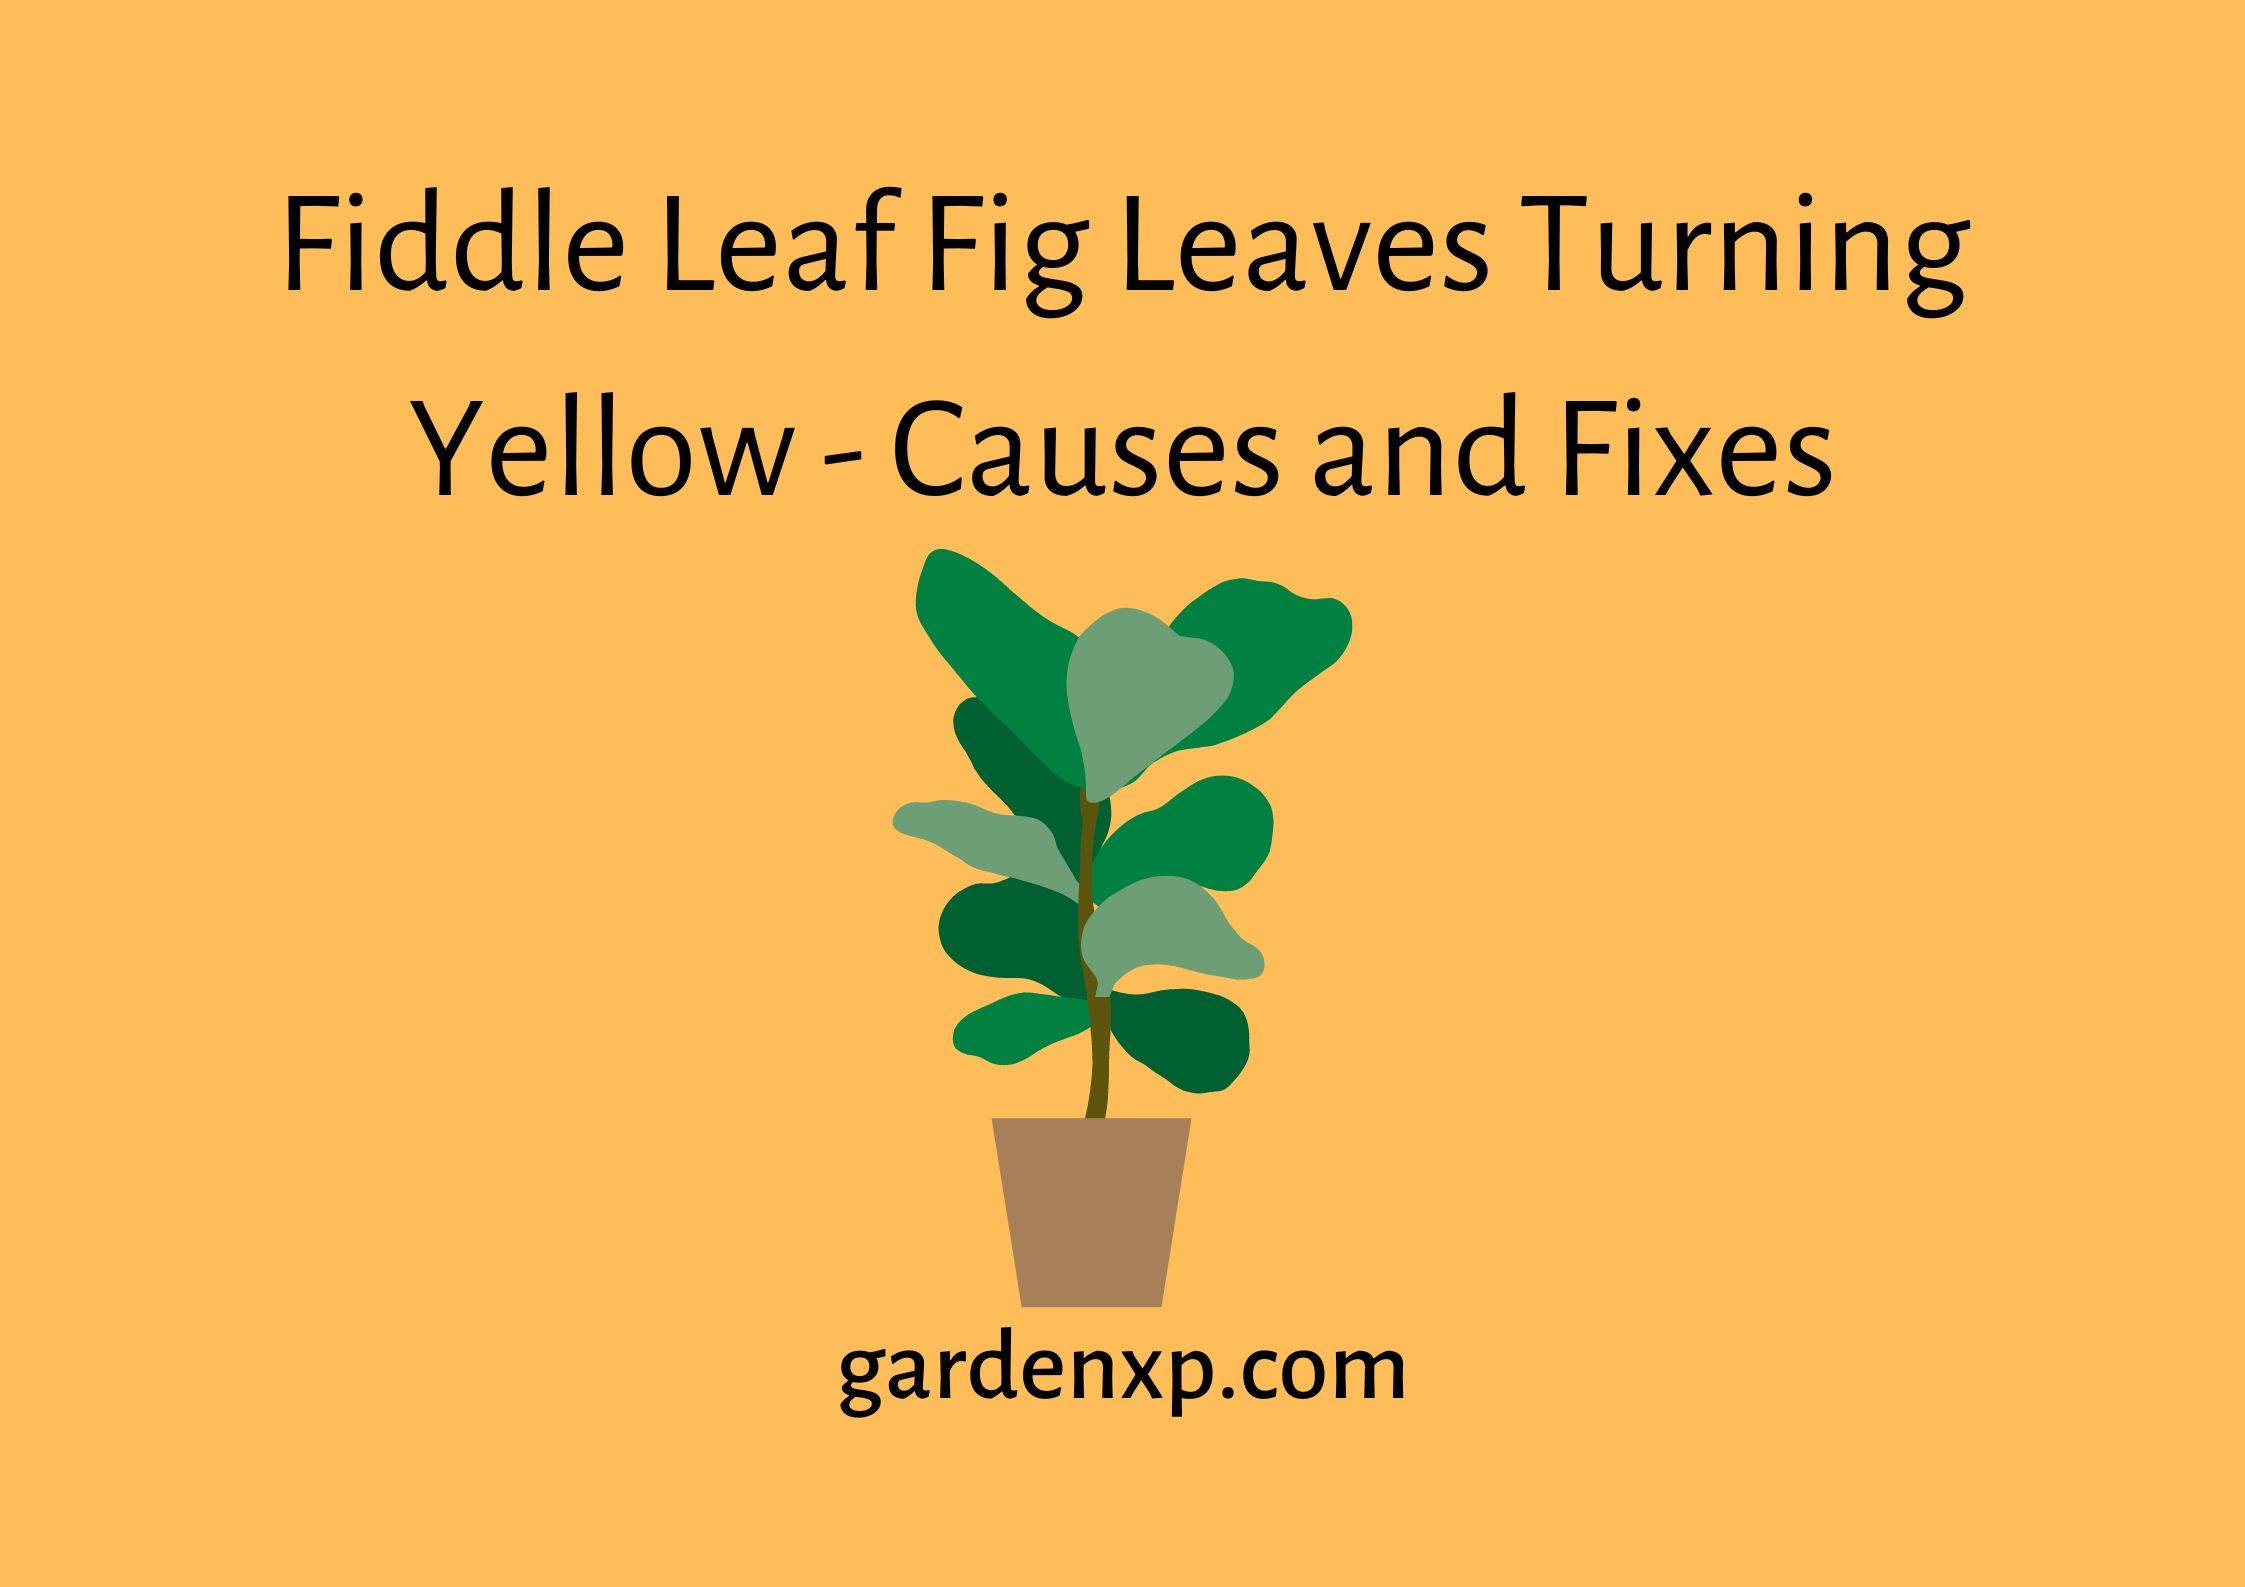 Fiddle Leaf Fig Leaves Turning Yellow - Causes and Fixes